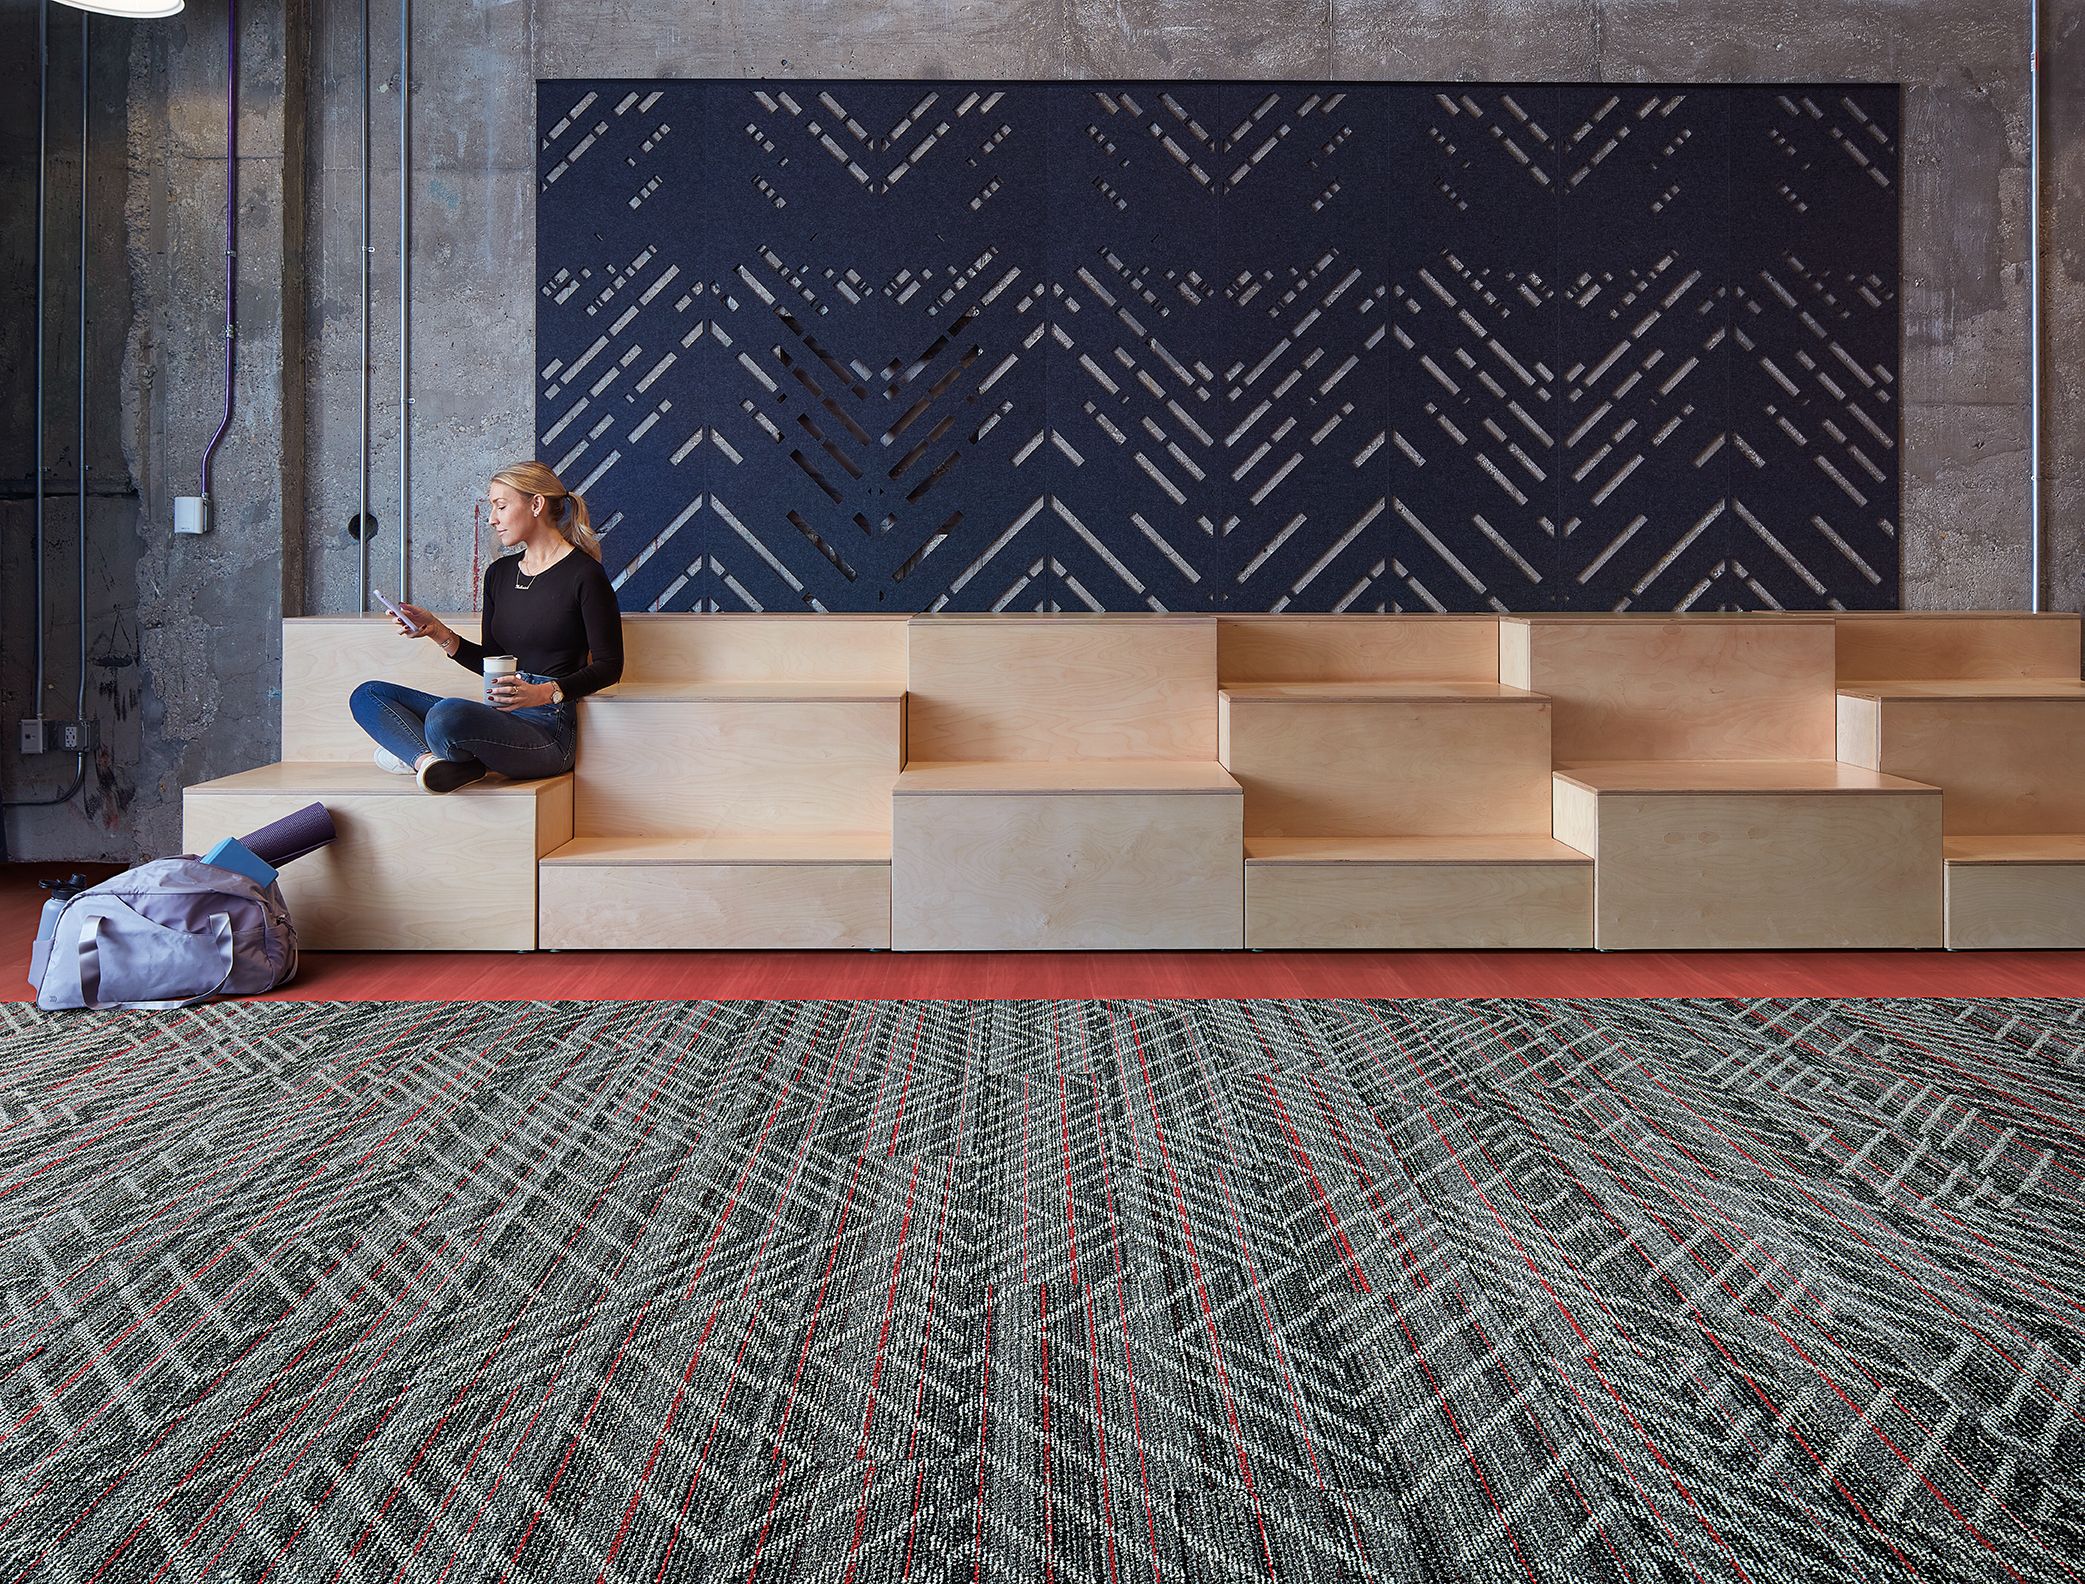 Interface Reflectors plank carpet tile with Studio Set LVT in open area with woman seated on wood risers imagen número 6